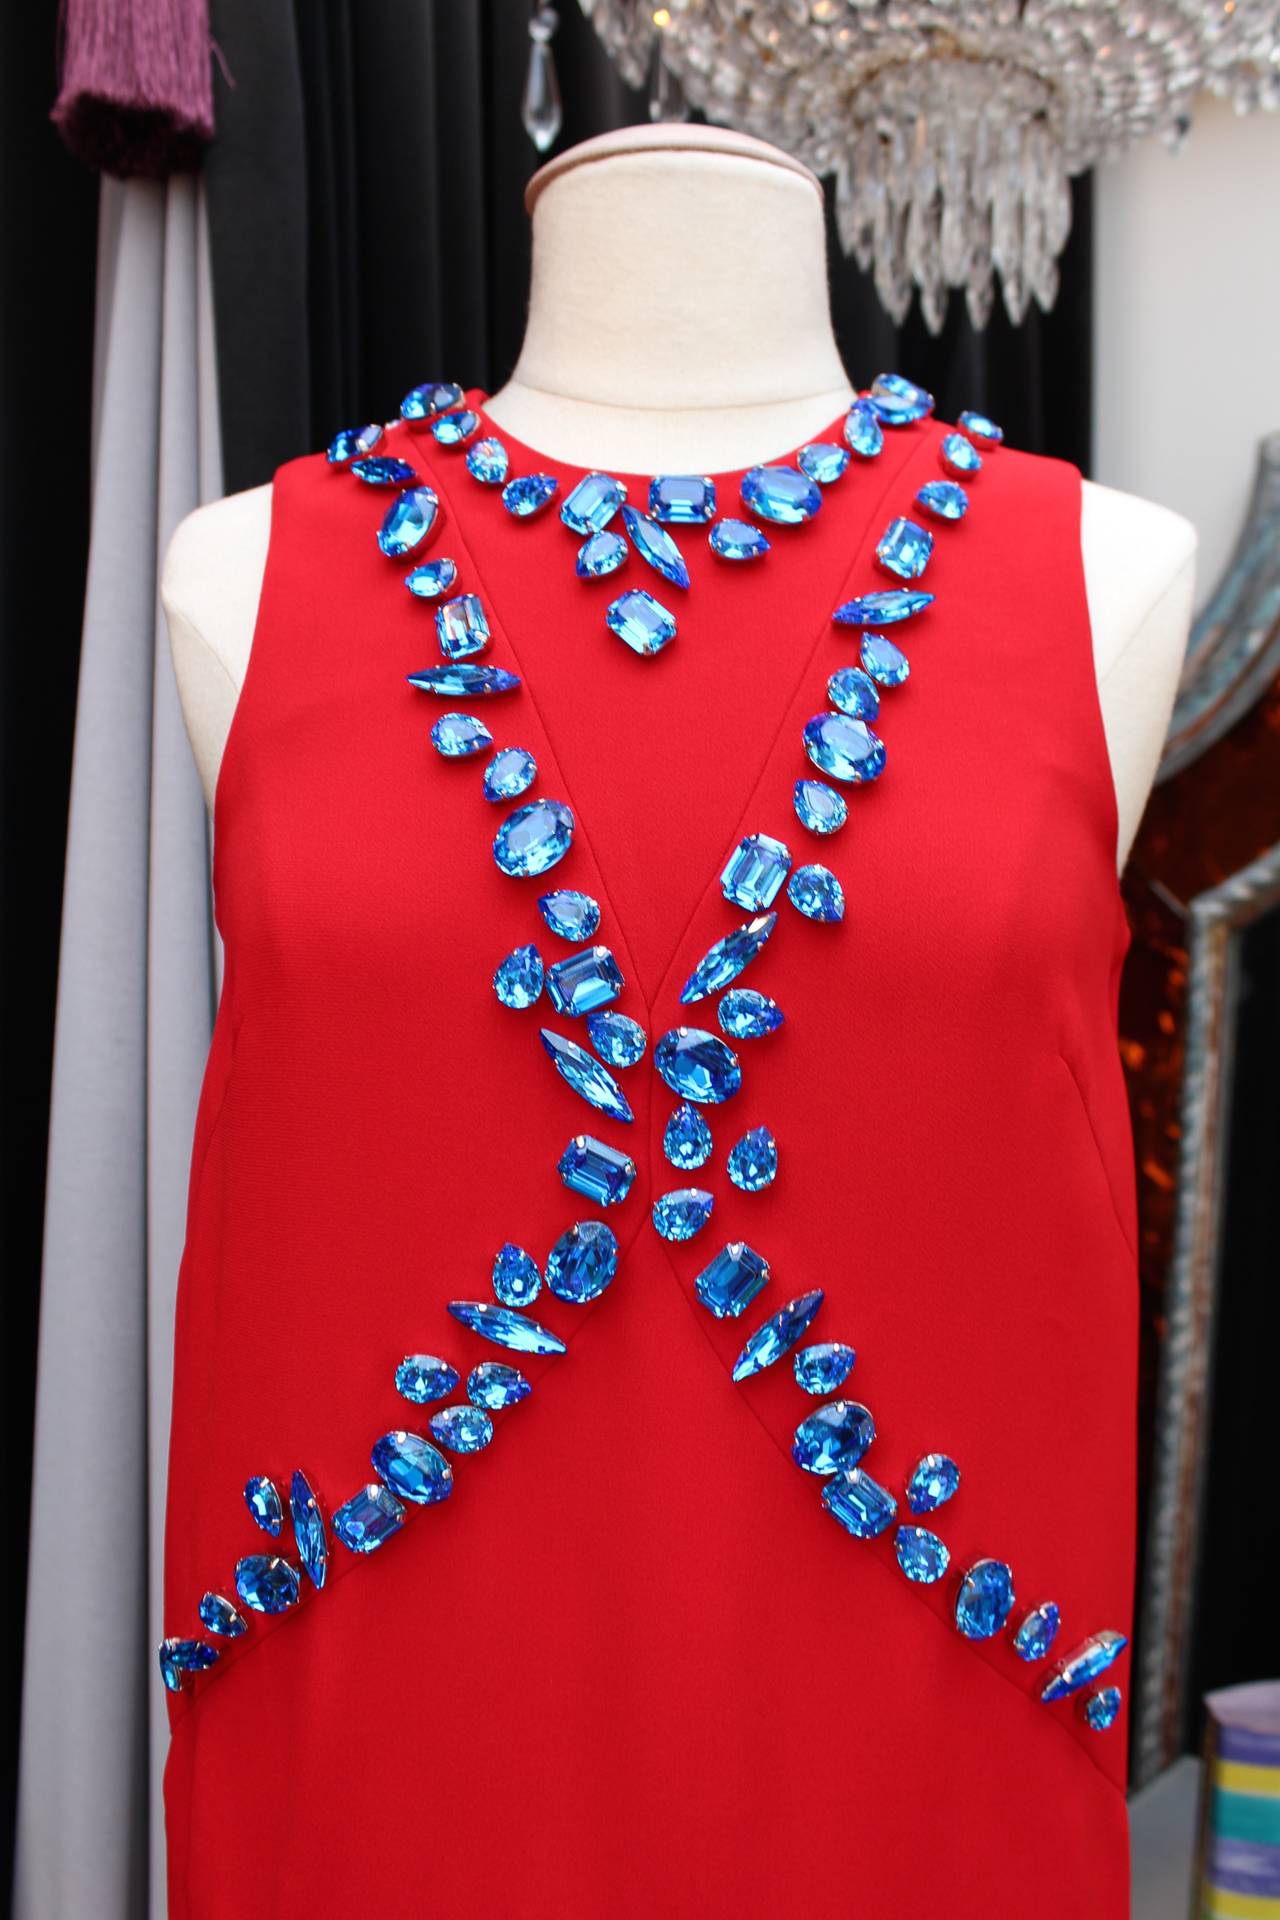 Spring 2014 Prada Red Dress with Bue Crystals 1